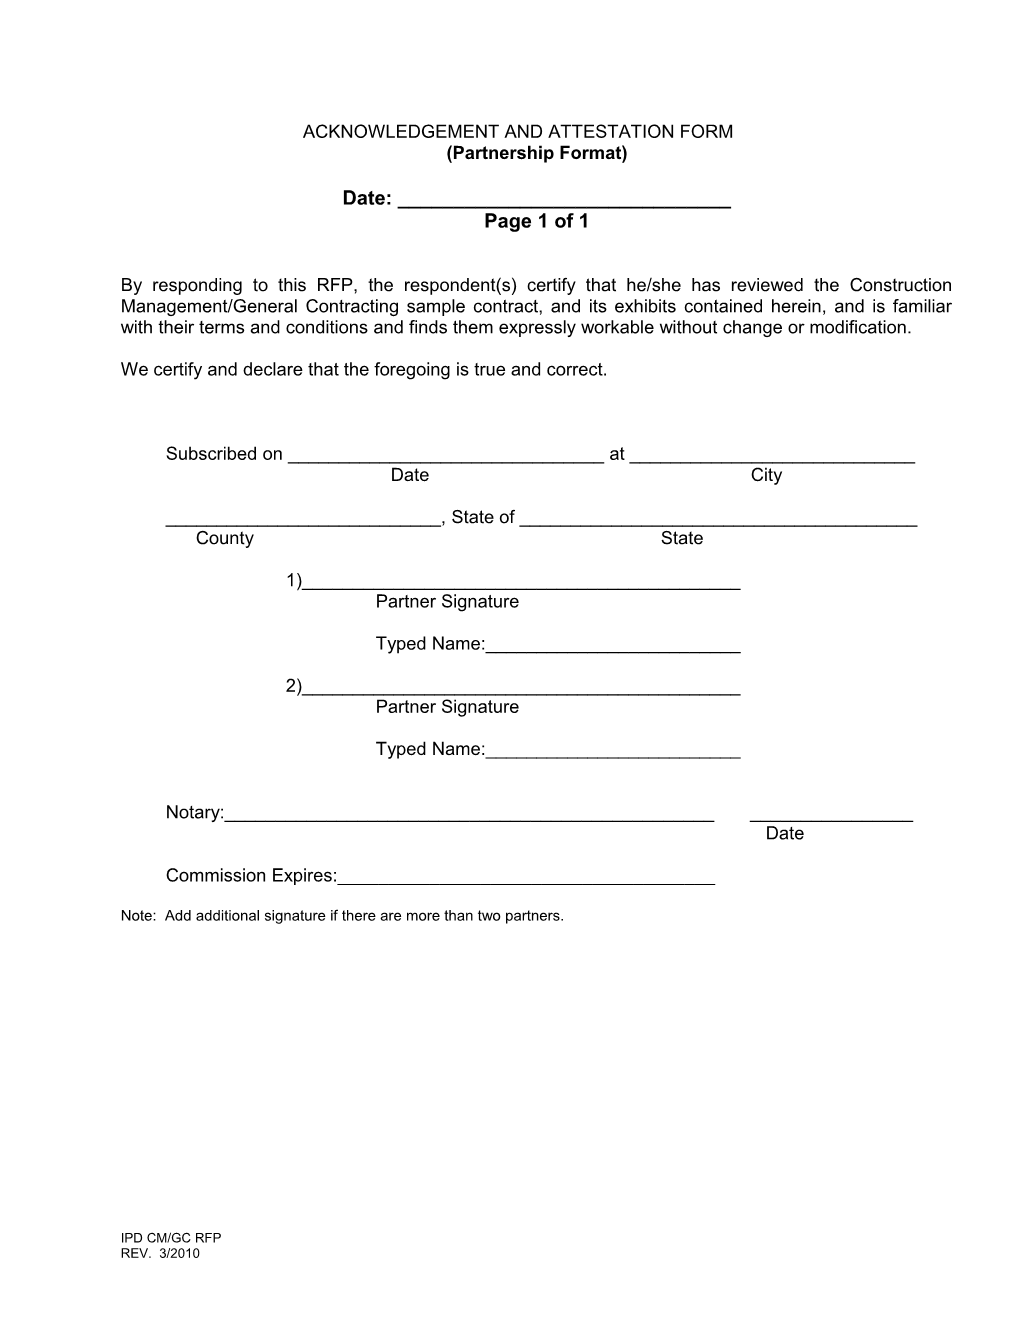 Acknowledgement and Attestation Form